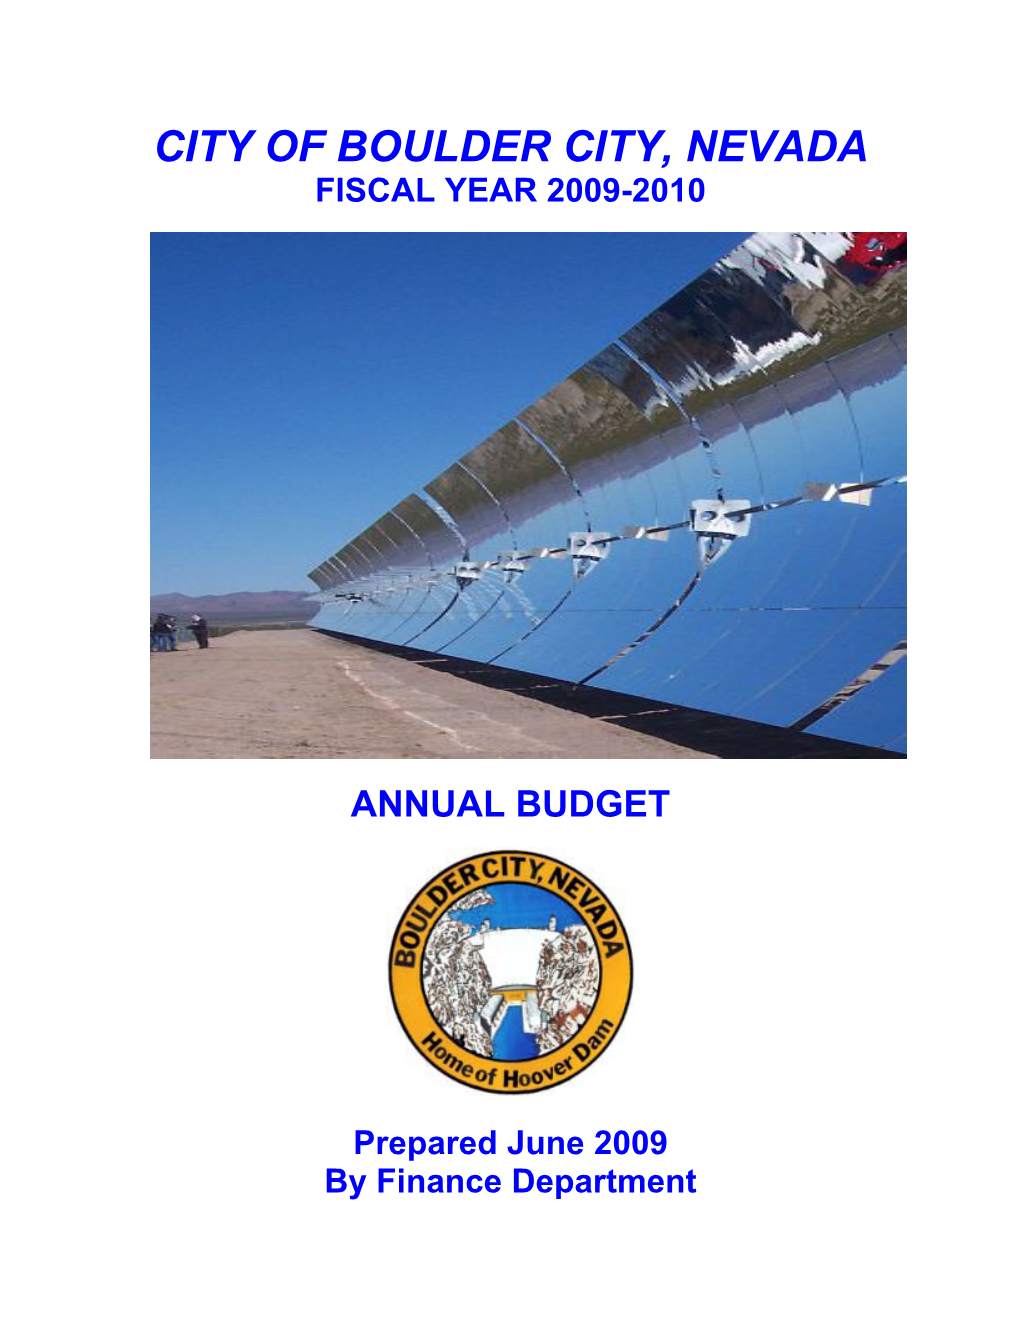 City of Boulder City, Nevada Fiscal Year 2009-2010